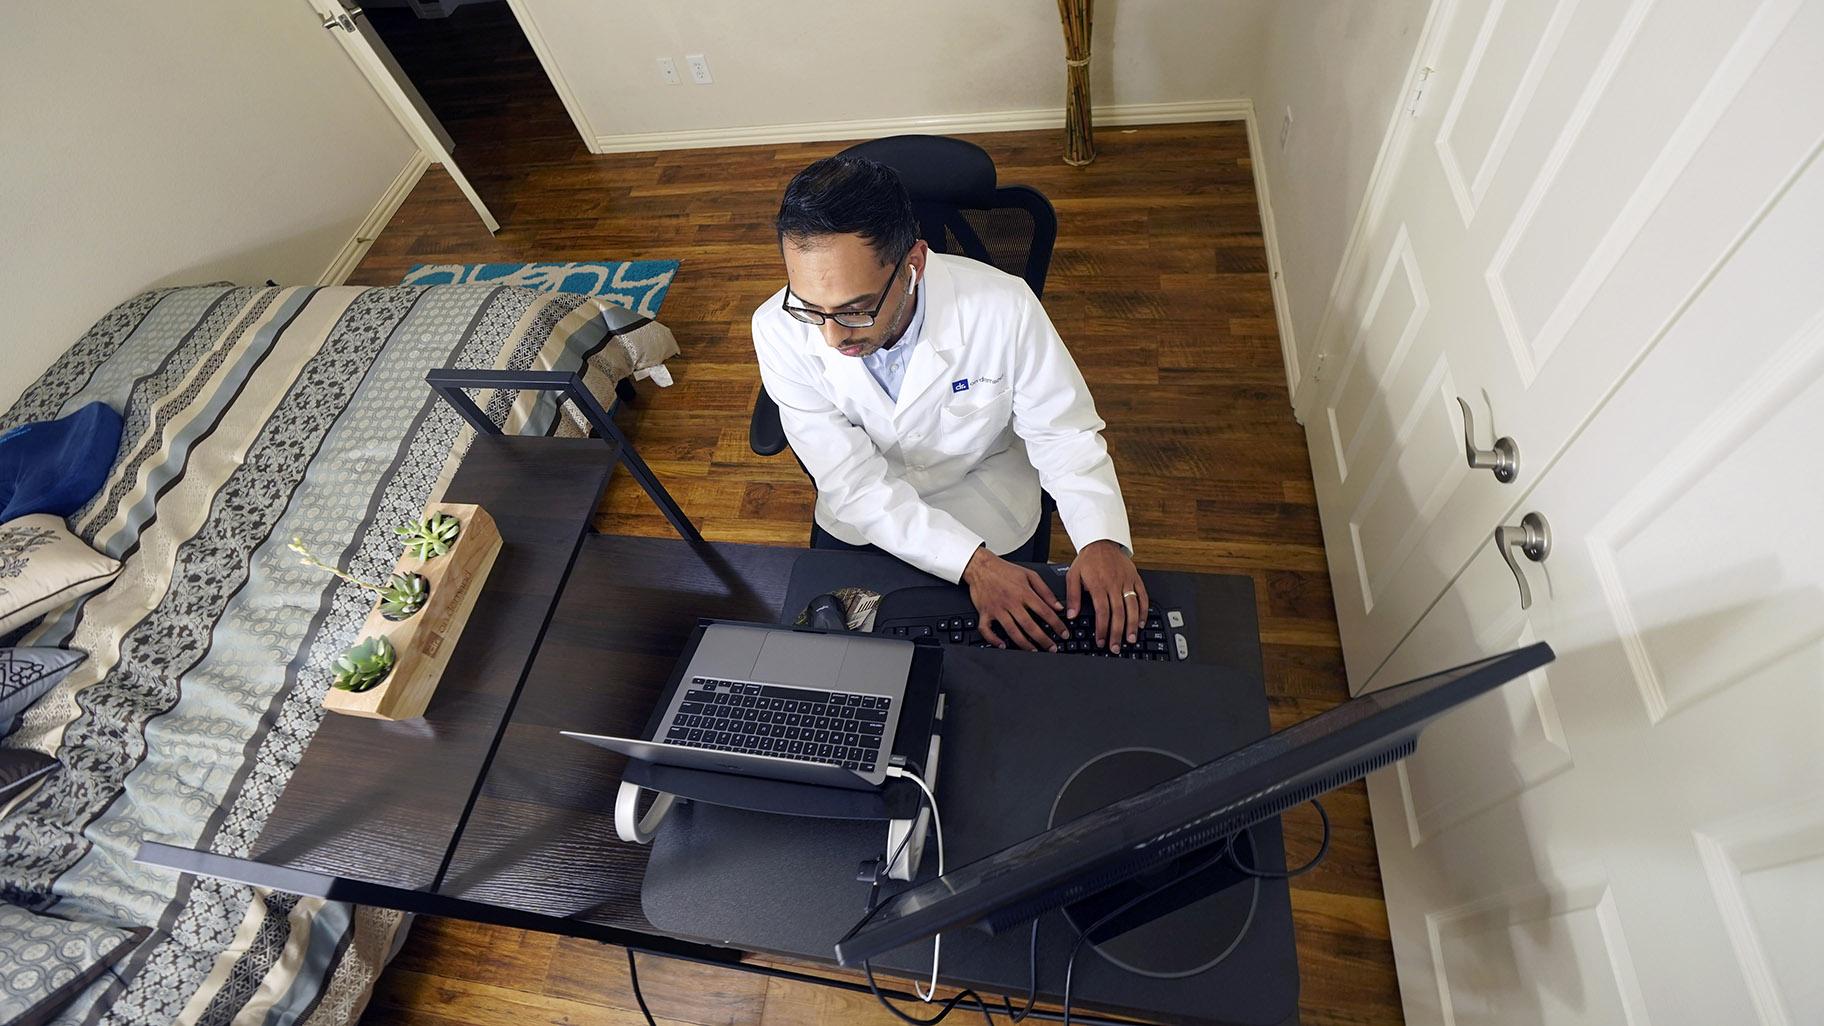 Medical director of Doctor on Demand Dr. Vibin Roy types notes as he listens to a patient during an online primary care visit from his home, Friday, April 23, 2021, in Keller, Texas. (AP Photo / LM Otero)